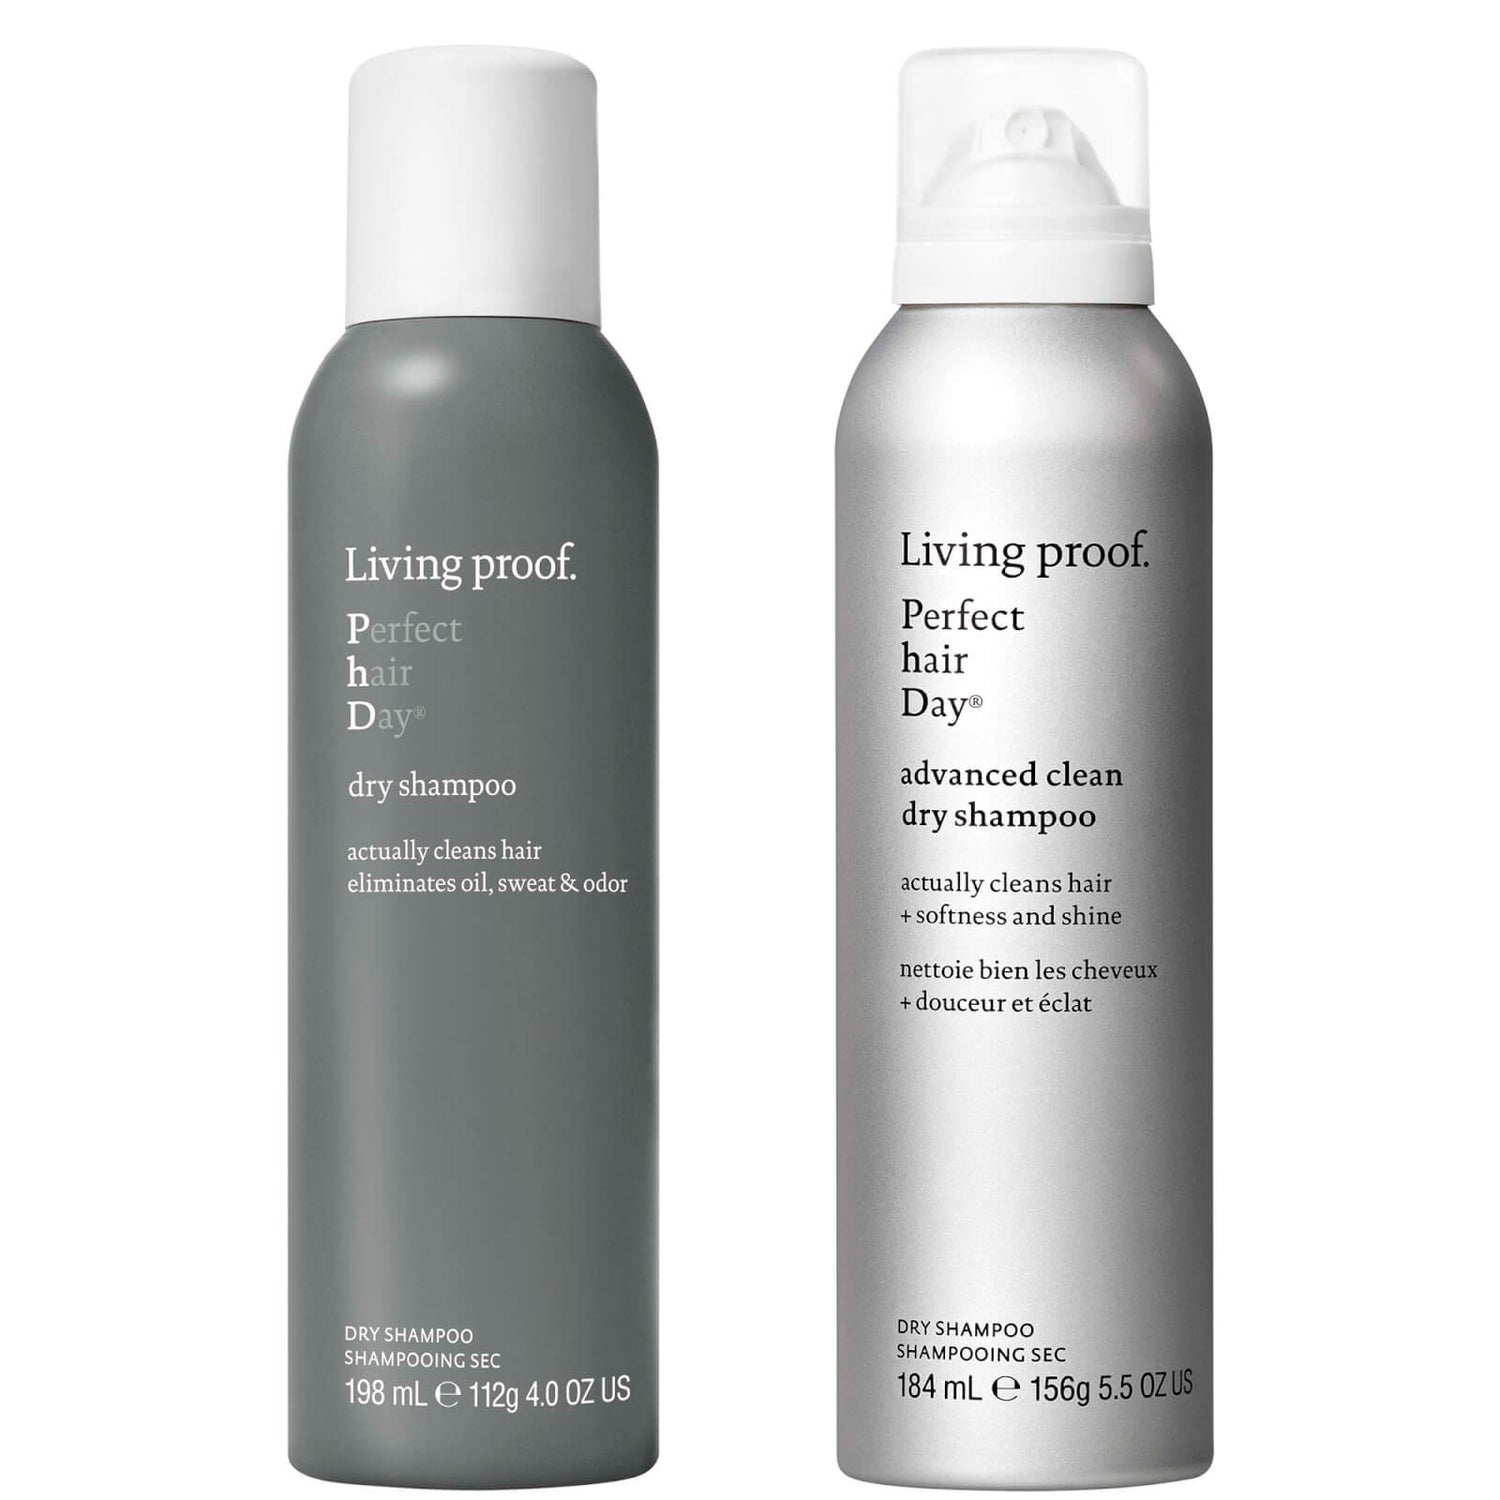 Living Proof Super Clean Dry Shampoo Duo